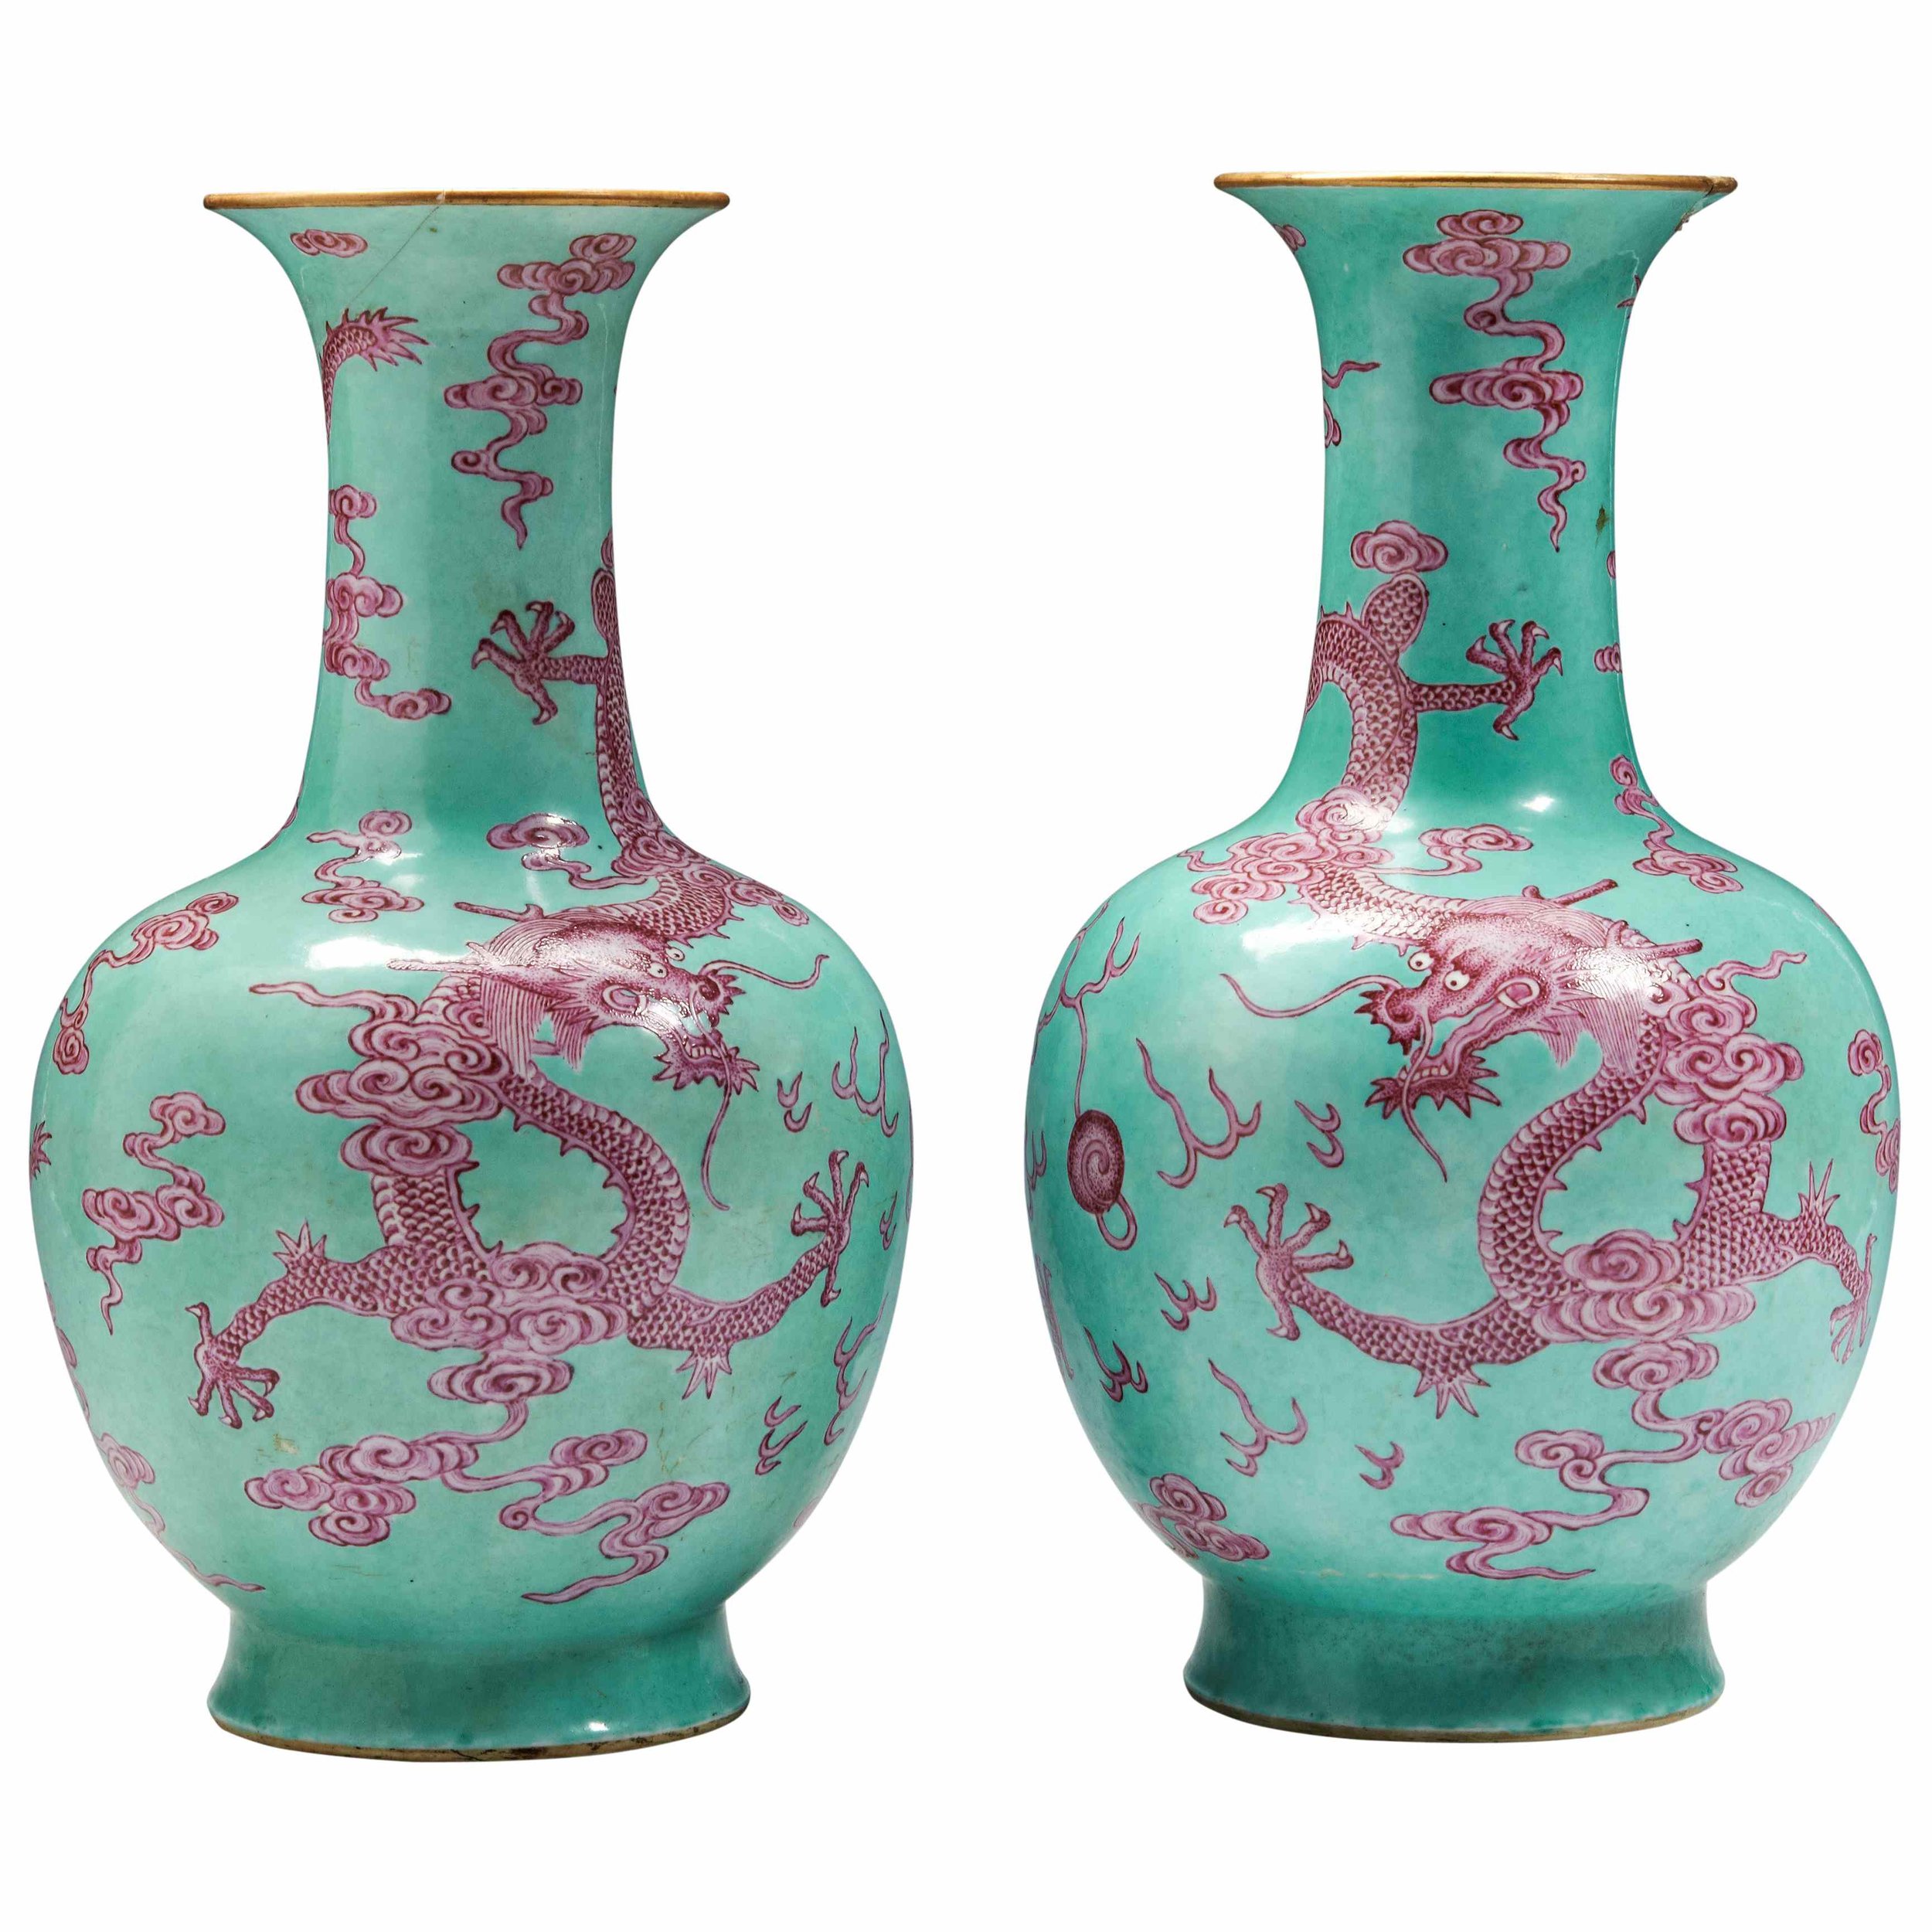 dore-and-rees-dragon-vases-20231106 rs.jpg